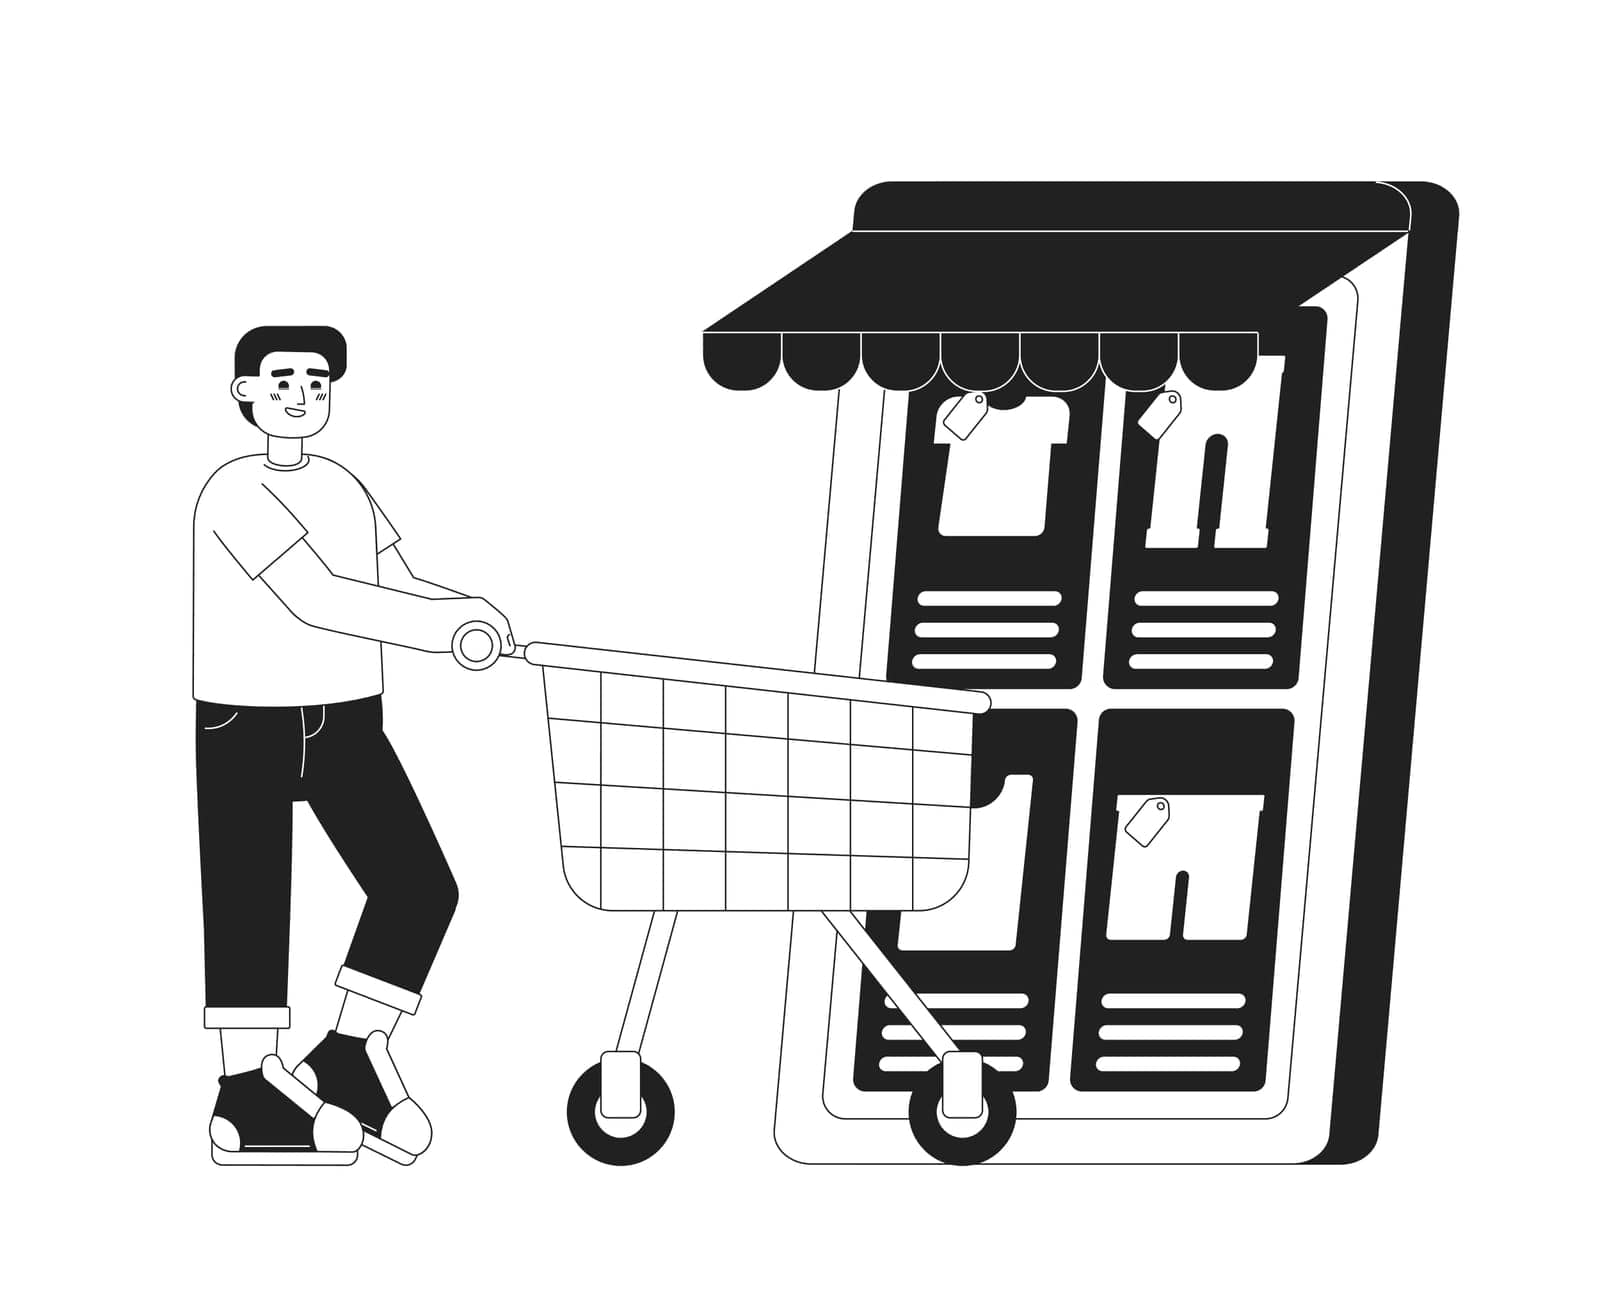 Online clothing store monochrome concept vector spot illustration. Editable 2D flat bw cartoon character for web UI design. Man with trolley cart purchasing clothes on phone hand drawn hero image